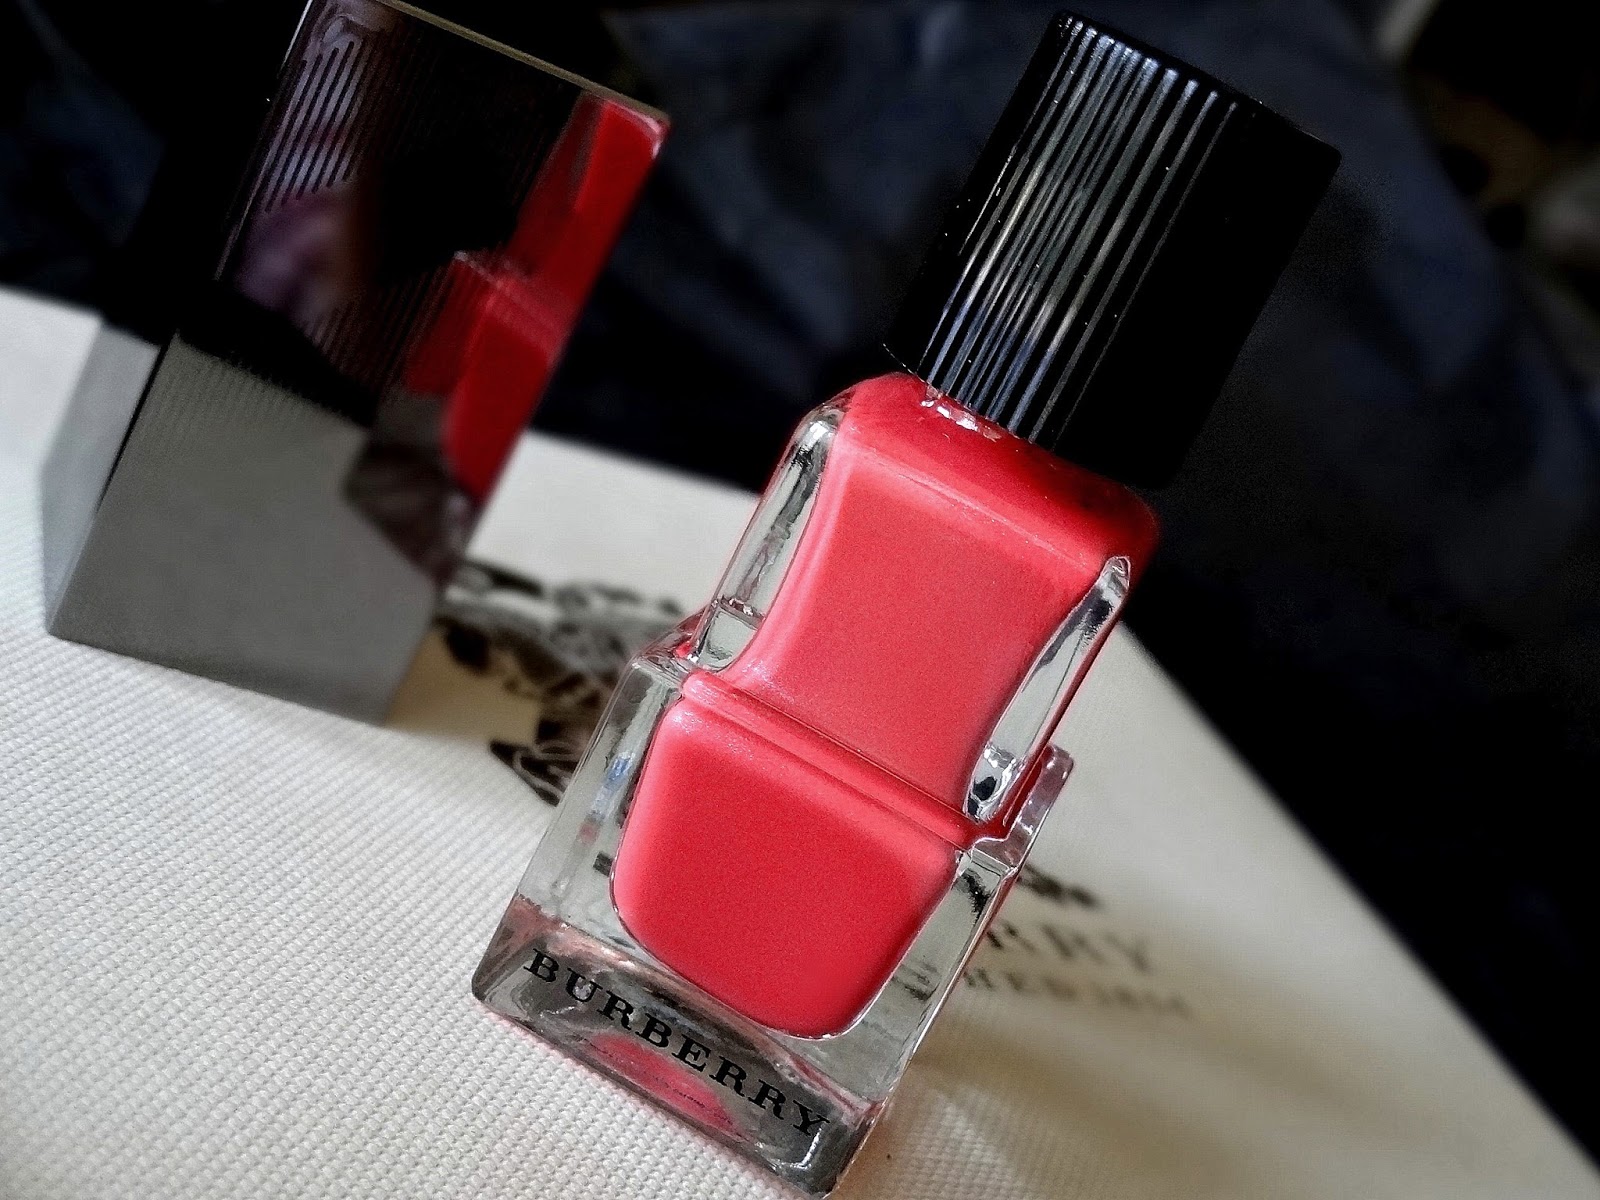 Burberry Summer Showers Makeup Collection Nail Polish in Orange Poppy No 221